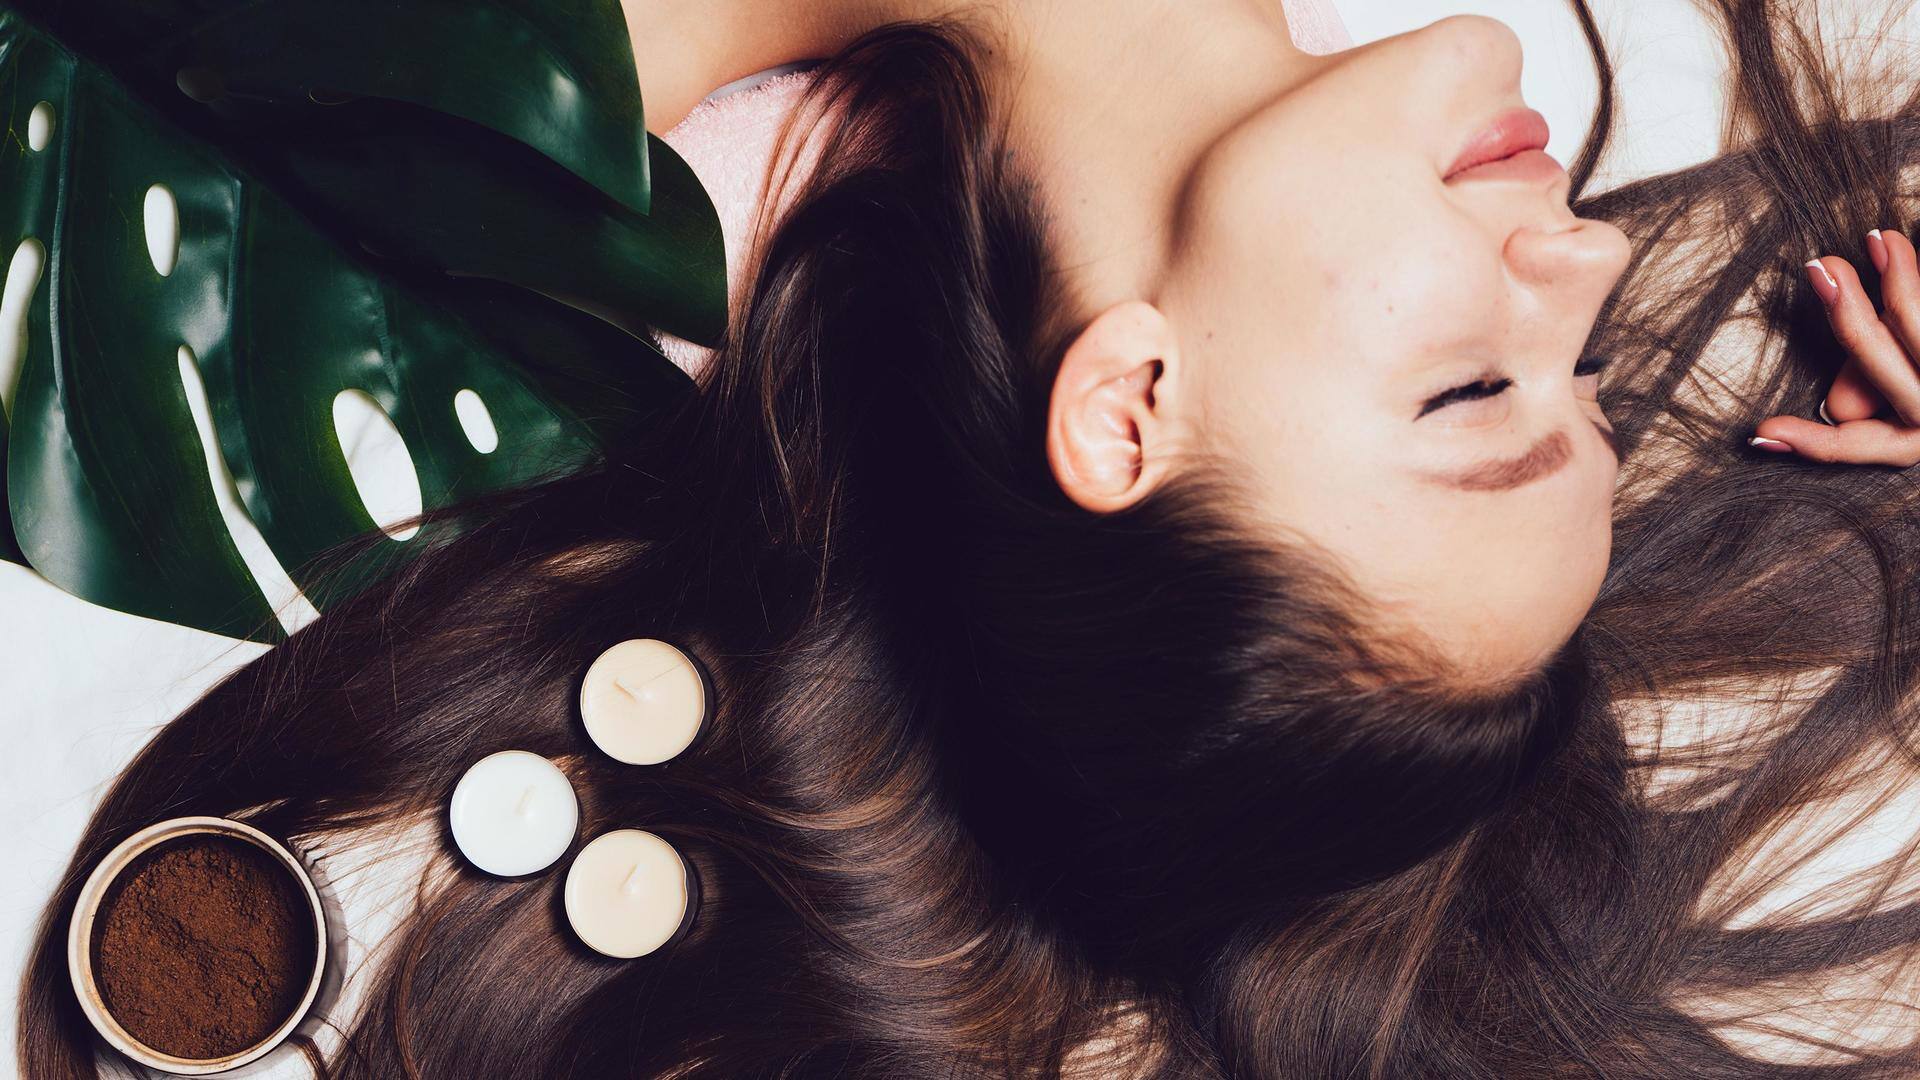 Want strong, healthy hair? Try these 5 homemade protein treatments